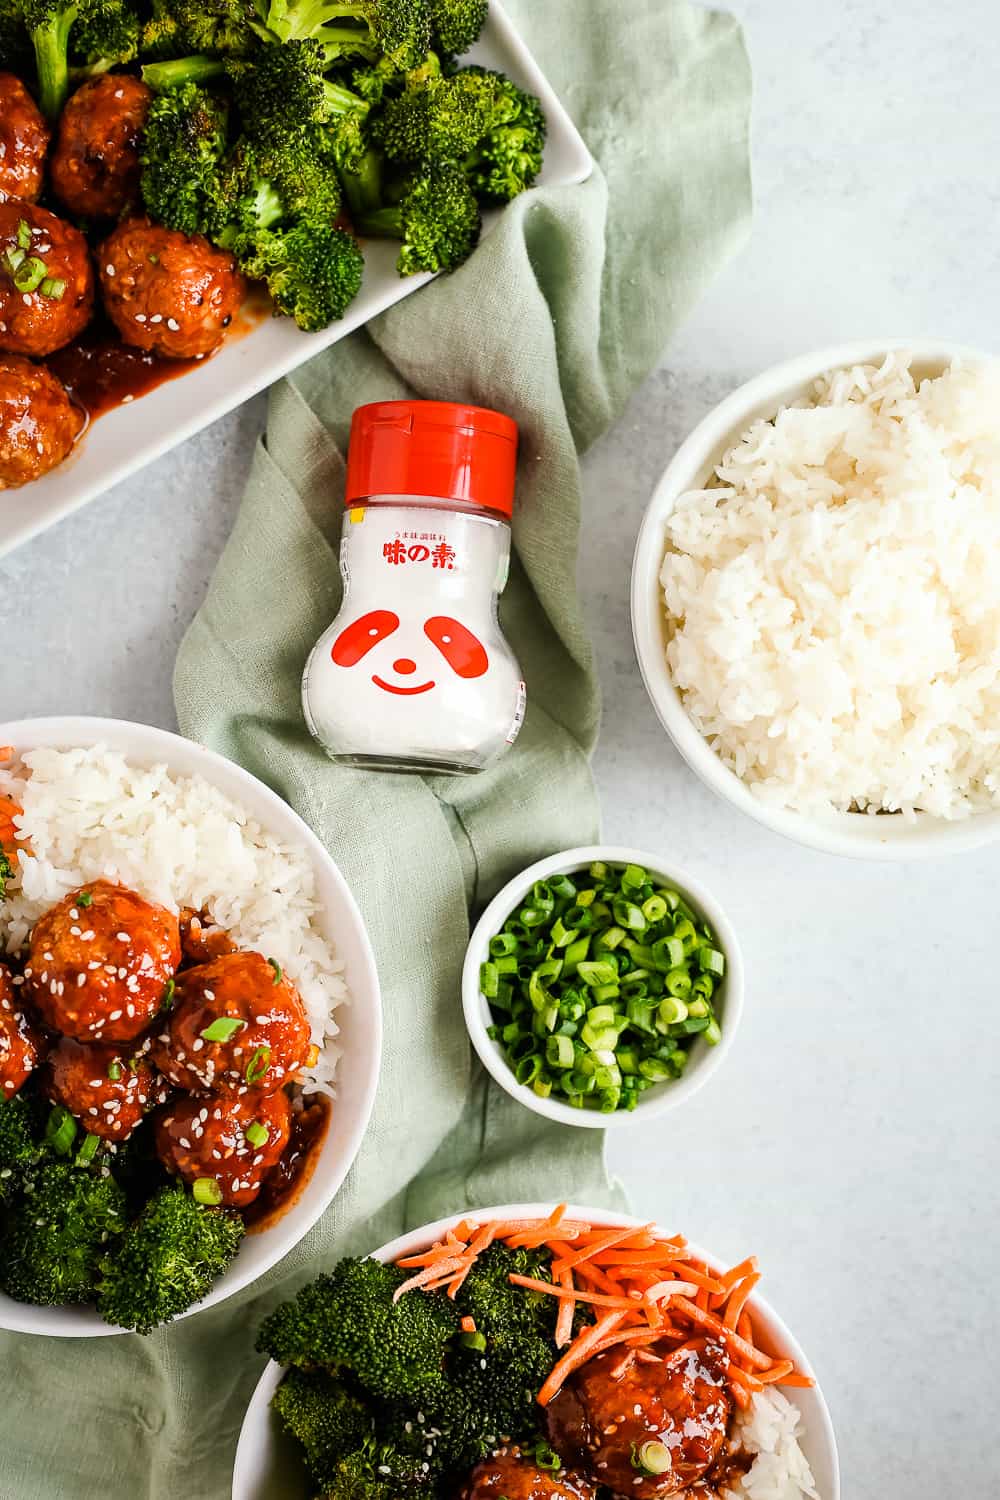 An overhead view of glass shaker of MSG with a red lid on a green linen in between dishes of rice bowls with spicy turkey meatballs and roasted broccoli